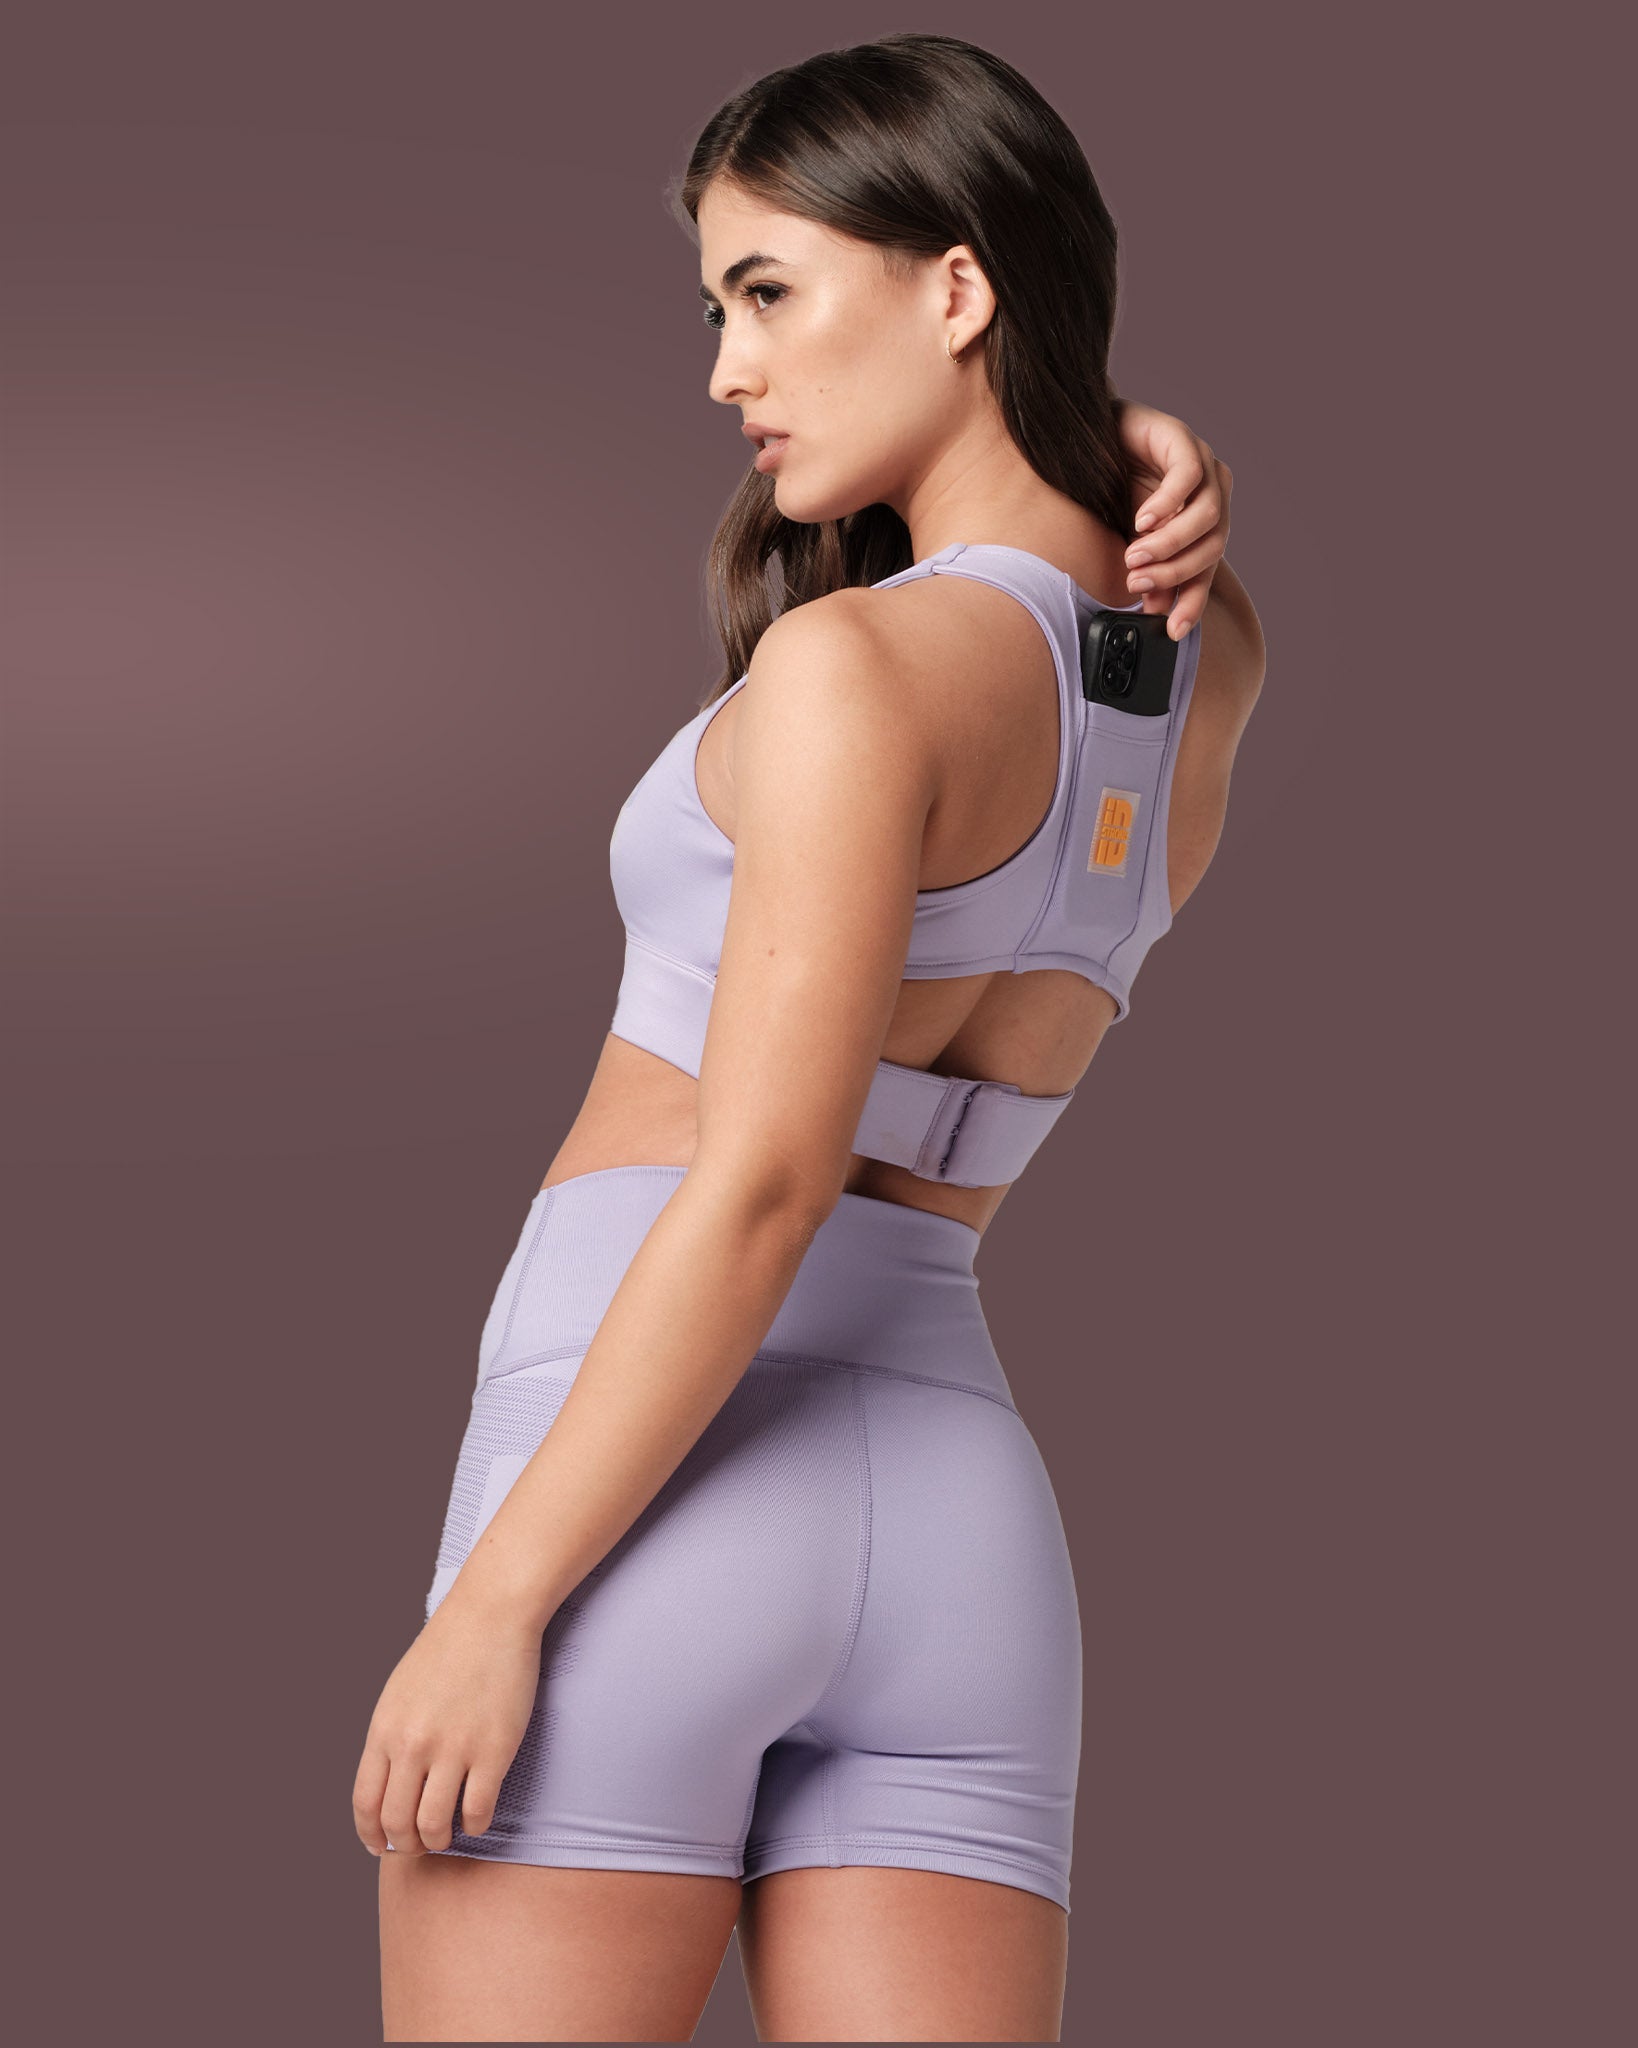 The Perfect Racerback Heather Grey Sports Bra for Strong Humans